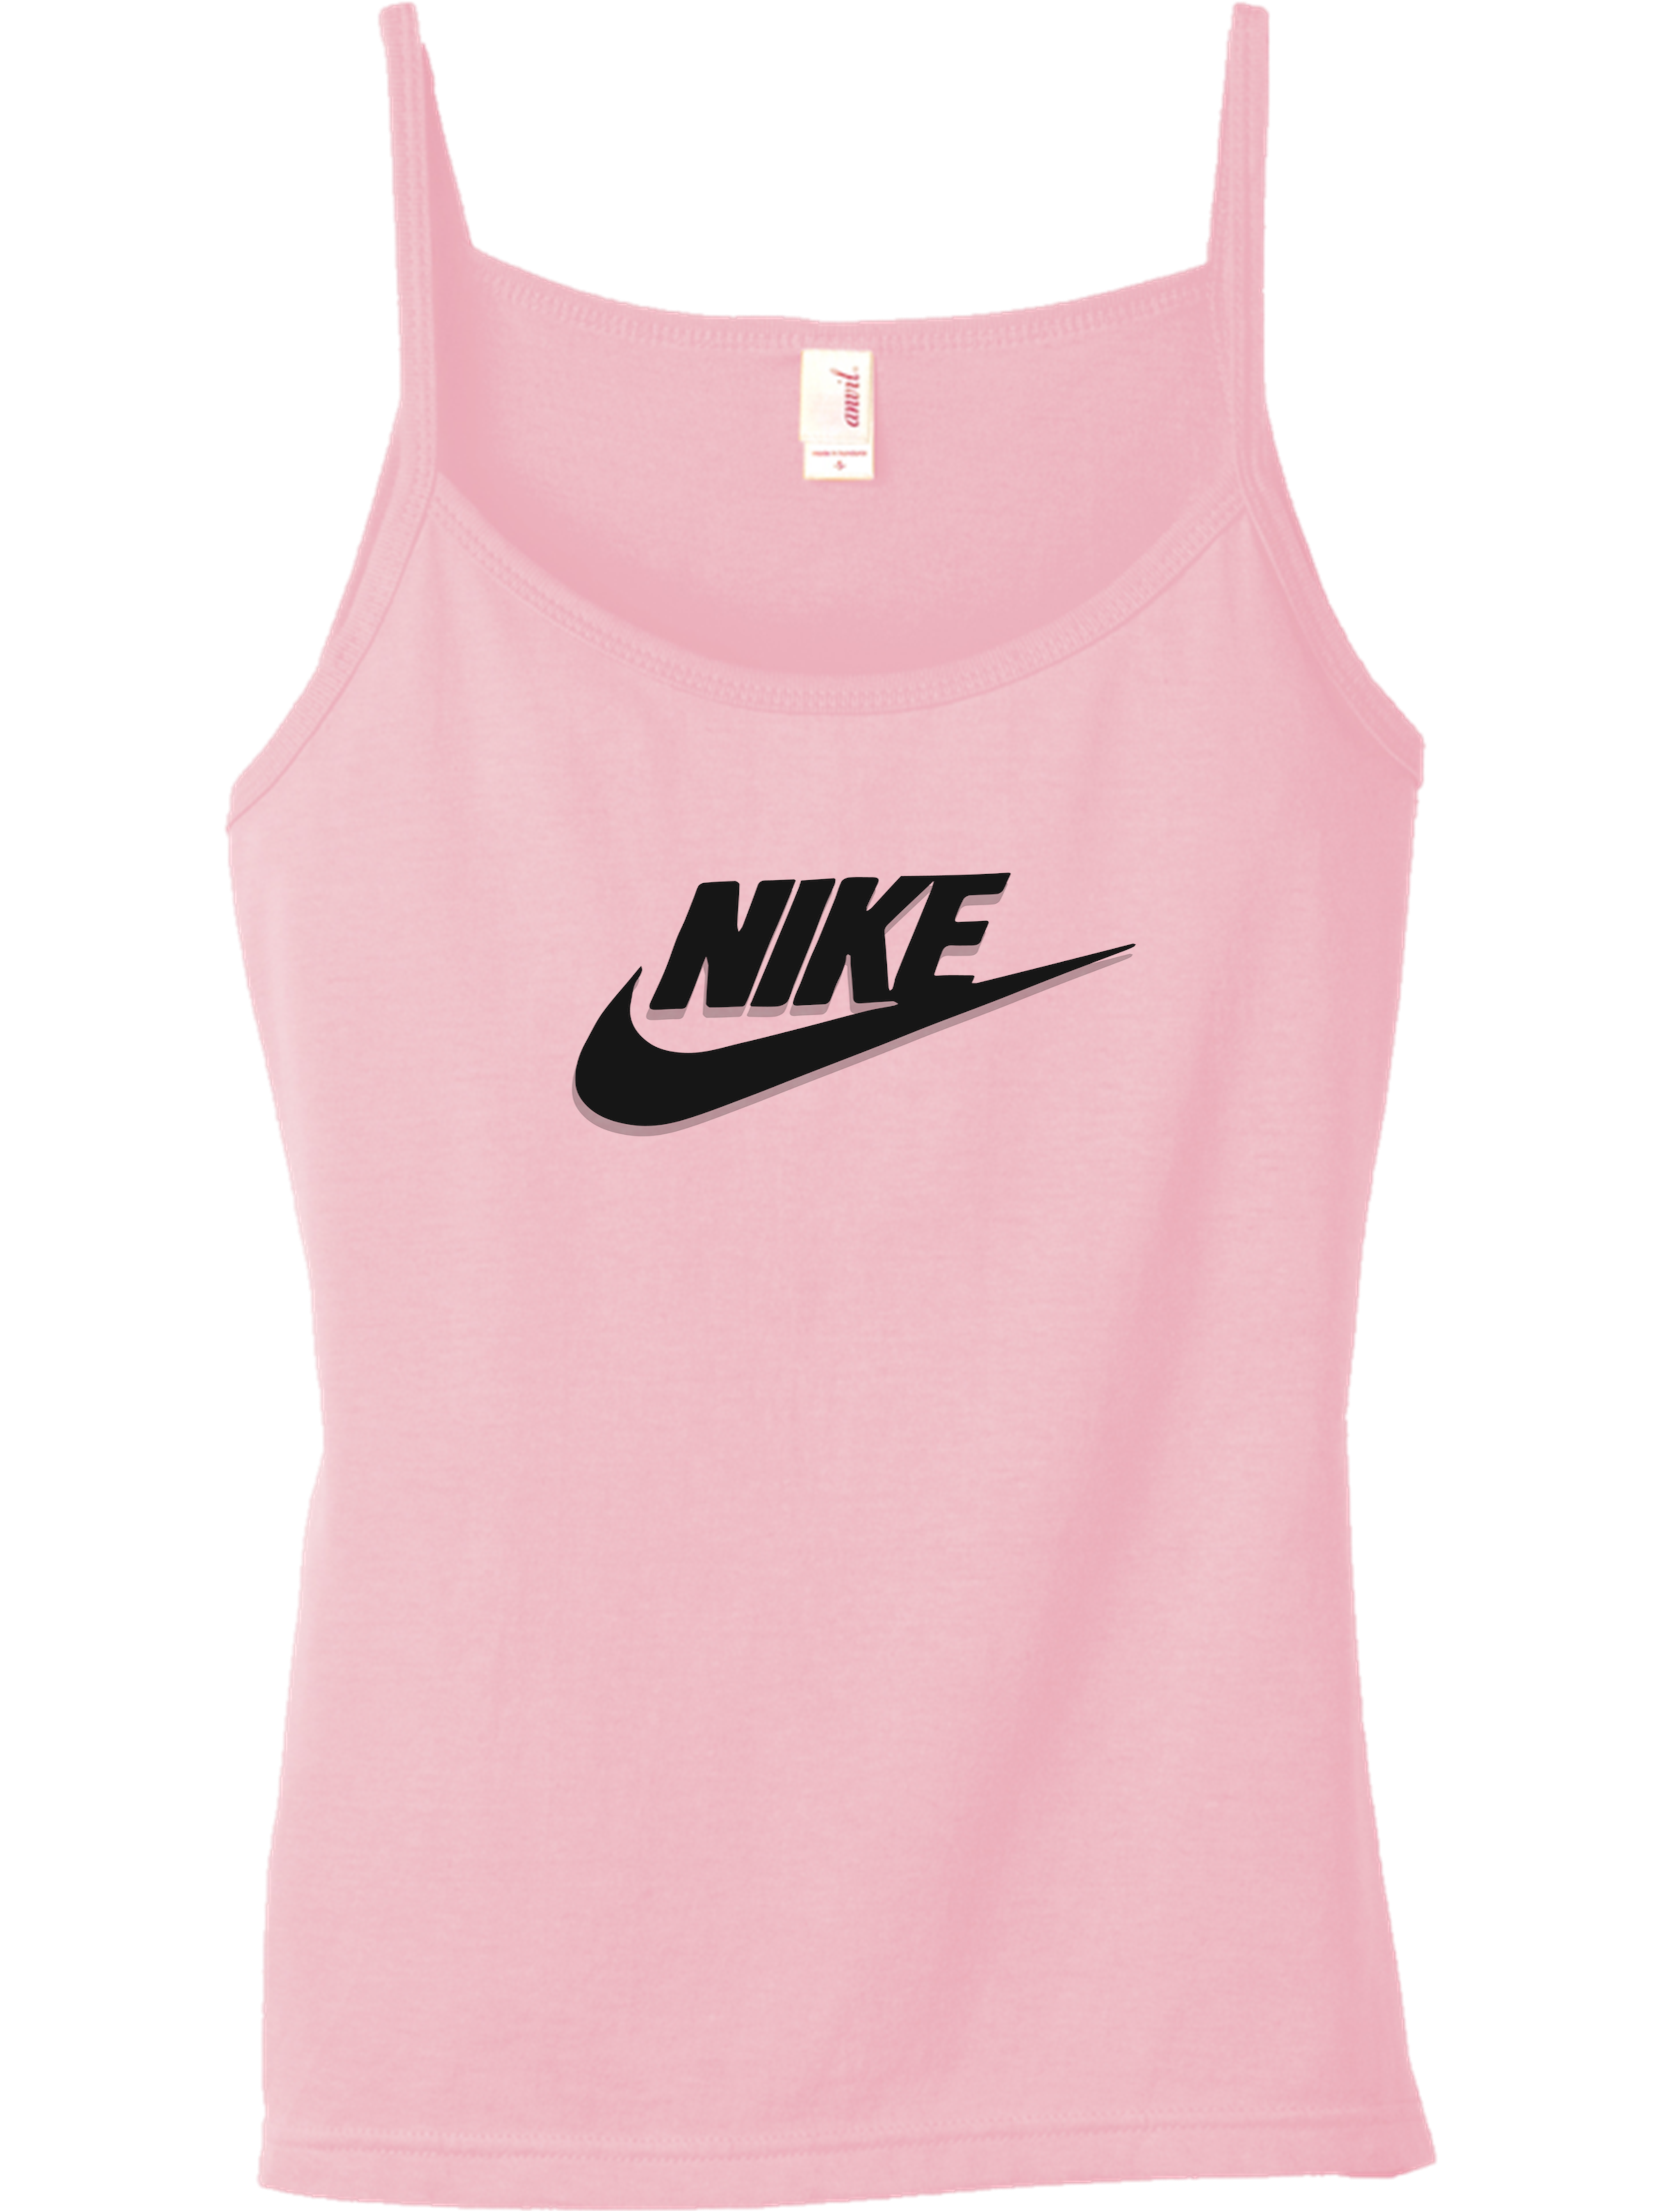 NIKE BLOUSE.png